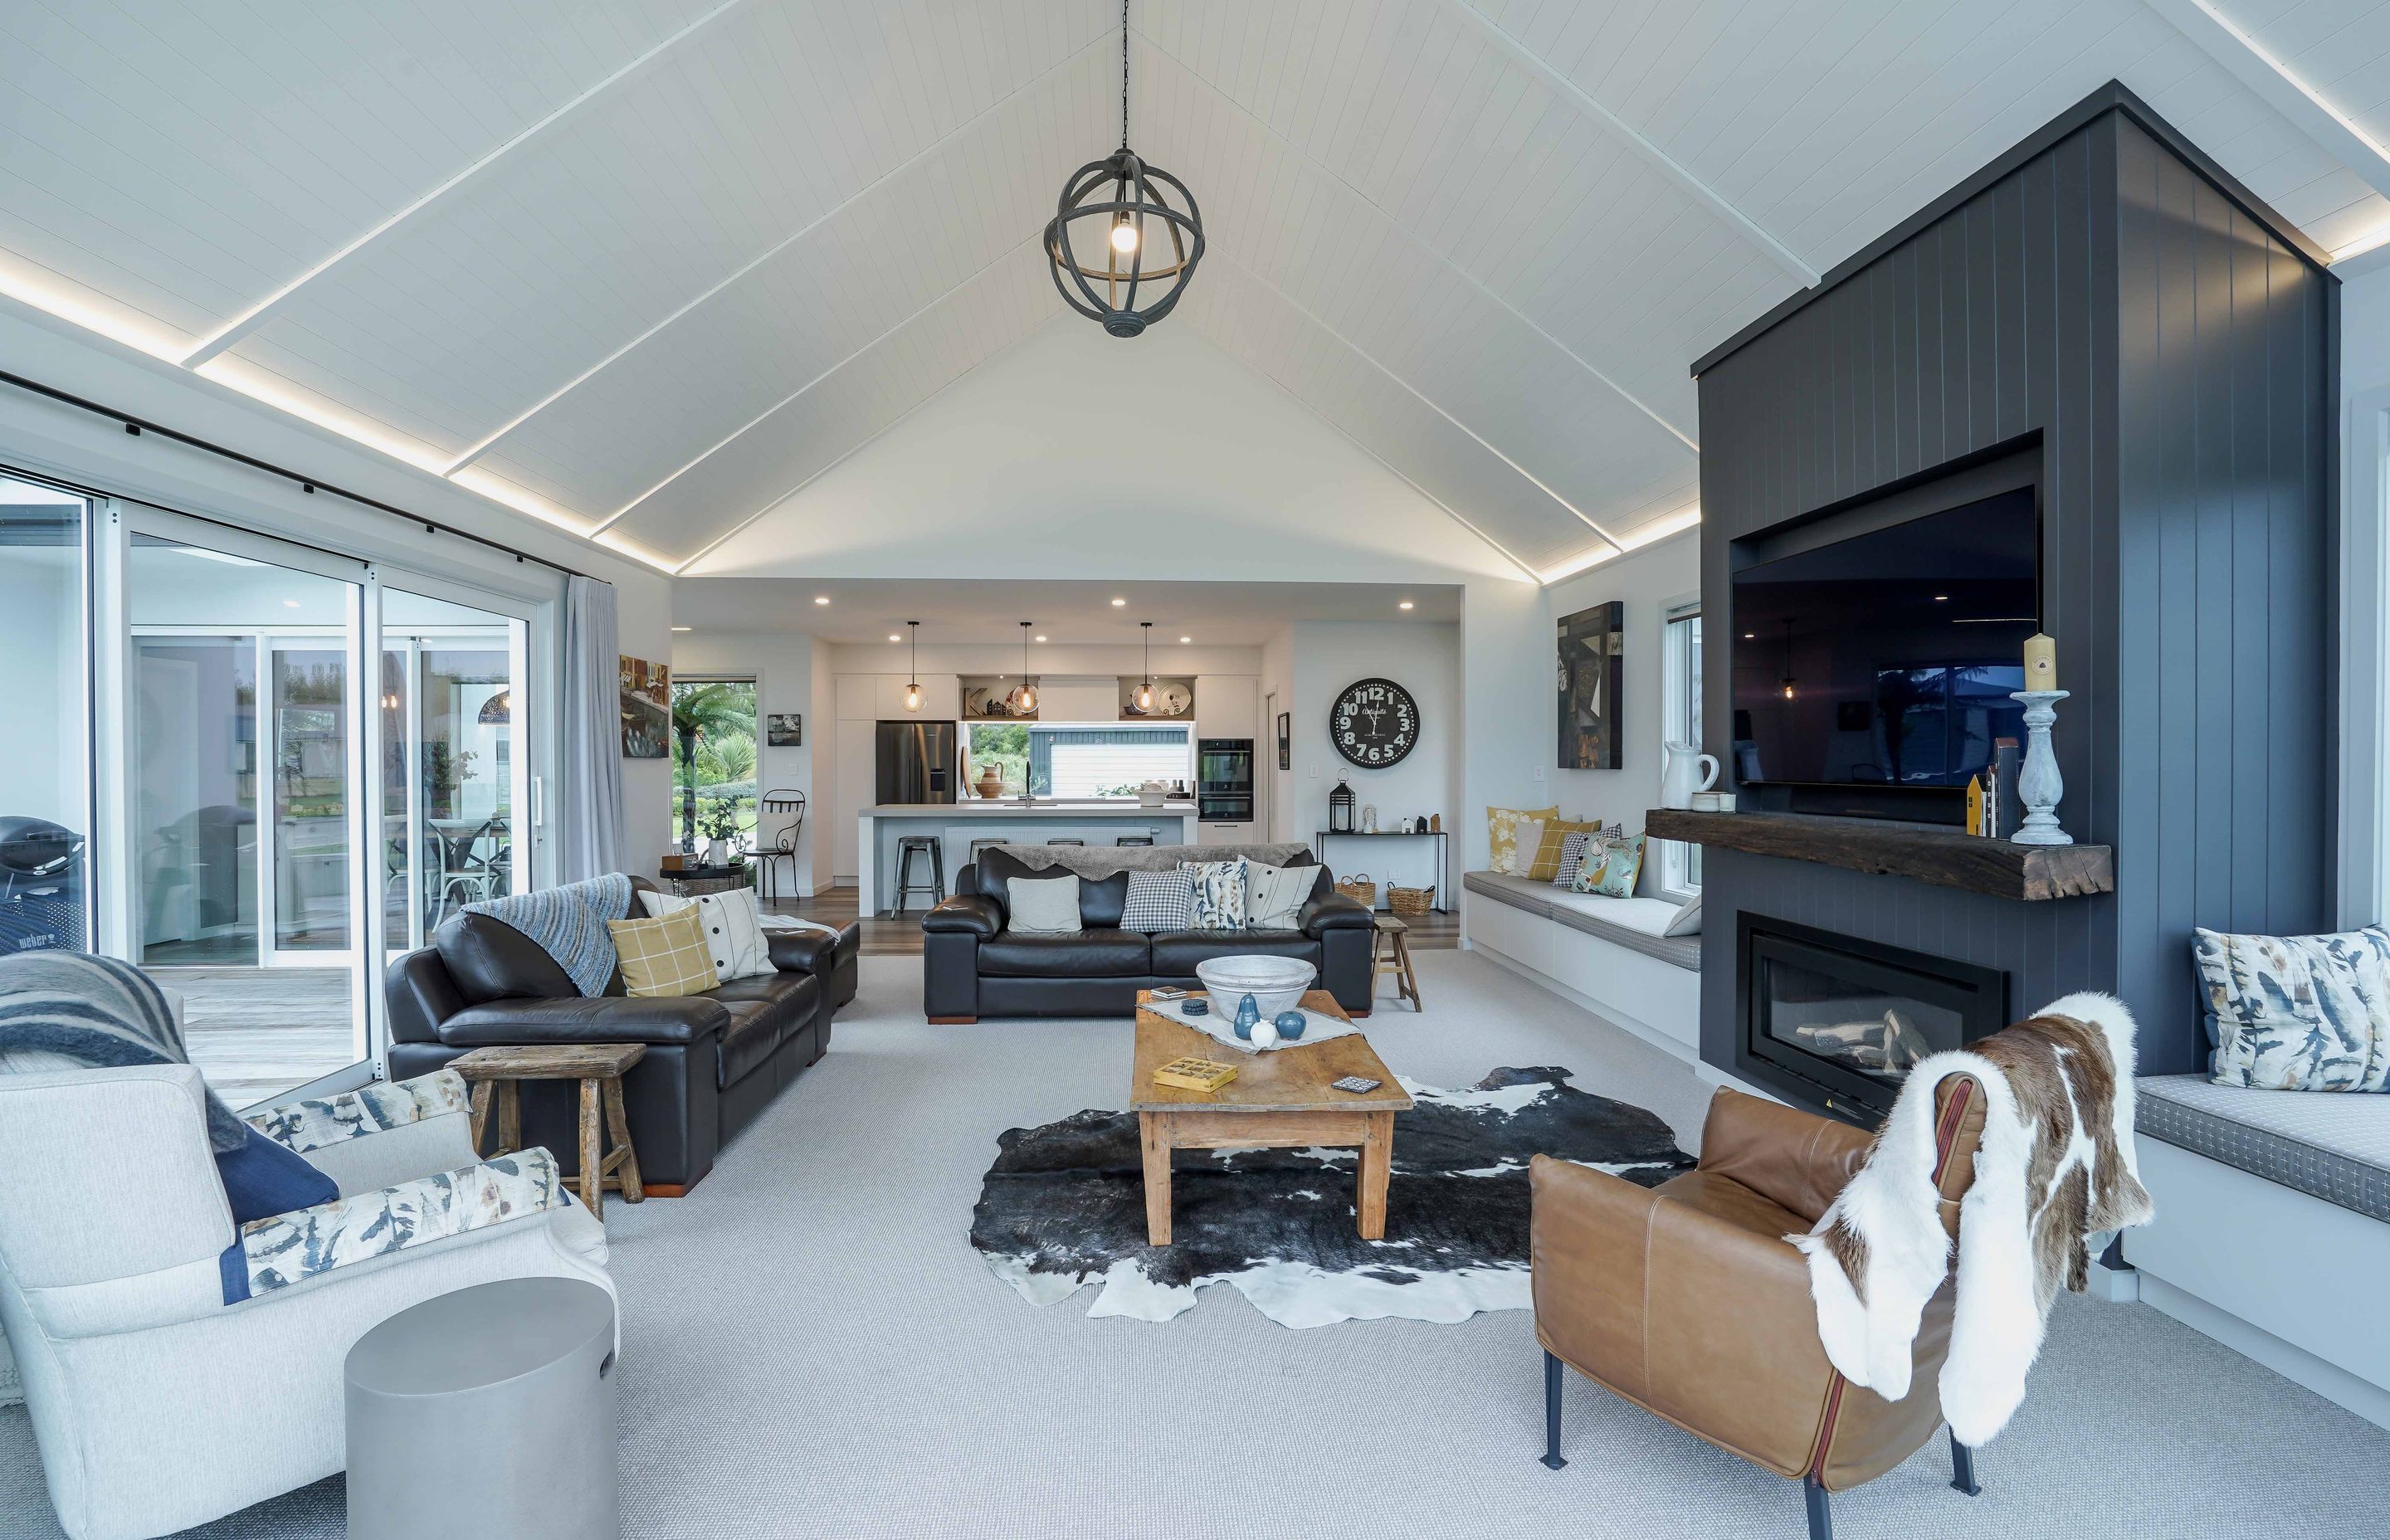 Exposed ceilings allowing the room to feel more spacious for this family home.